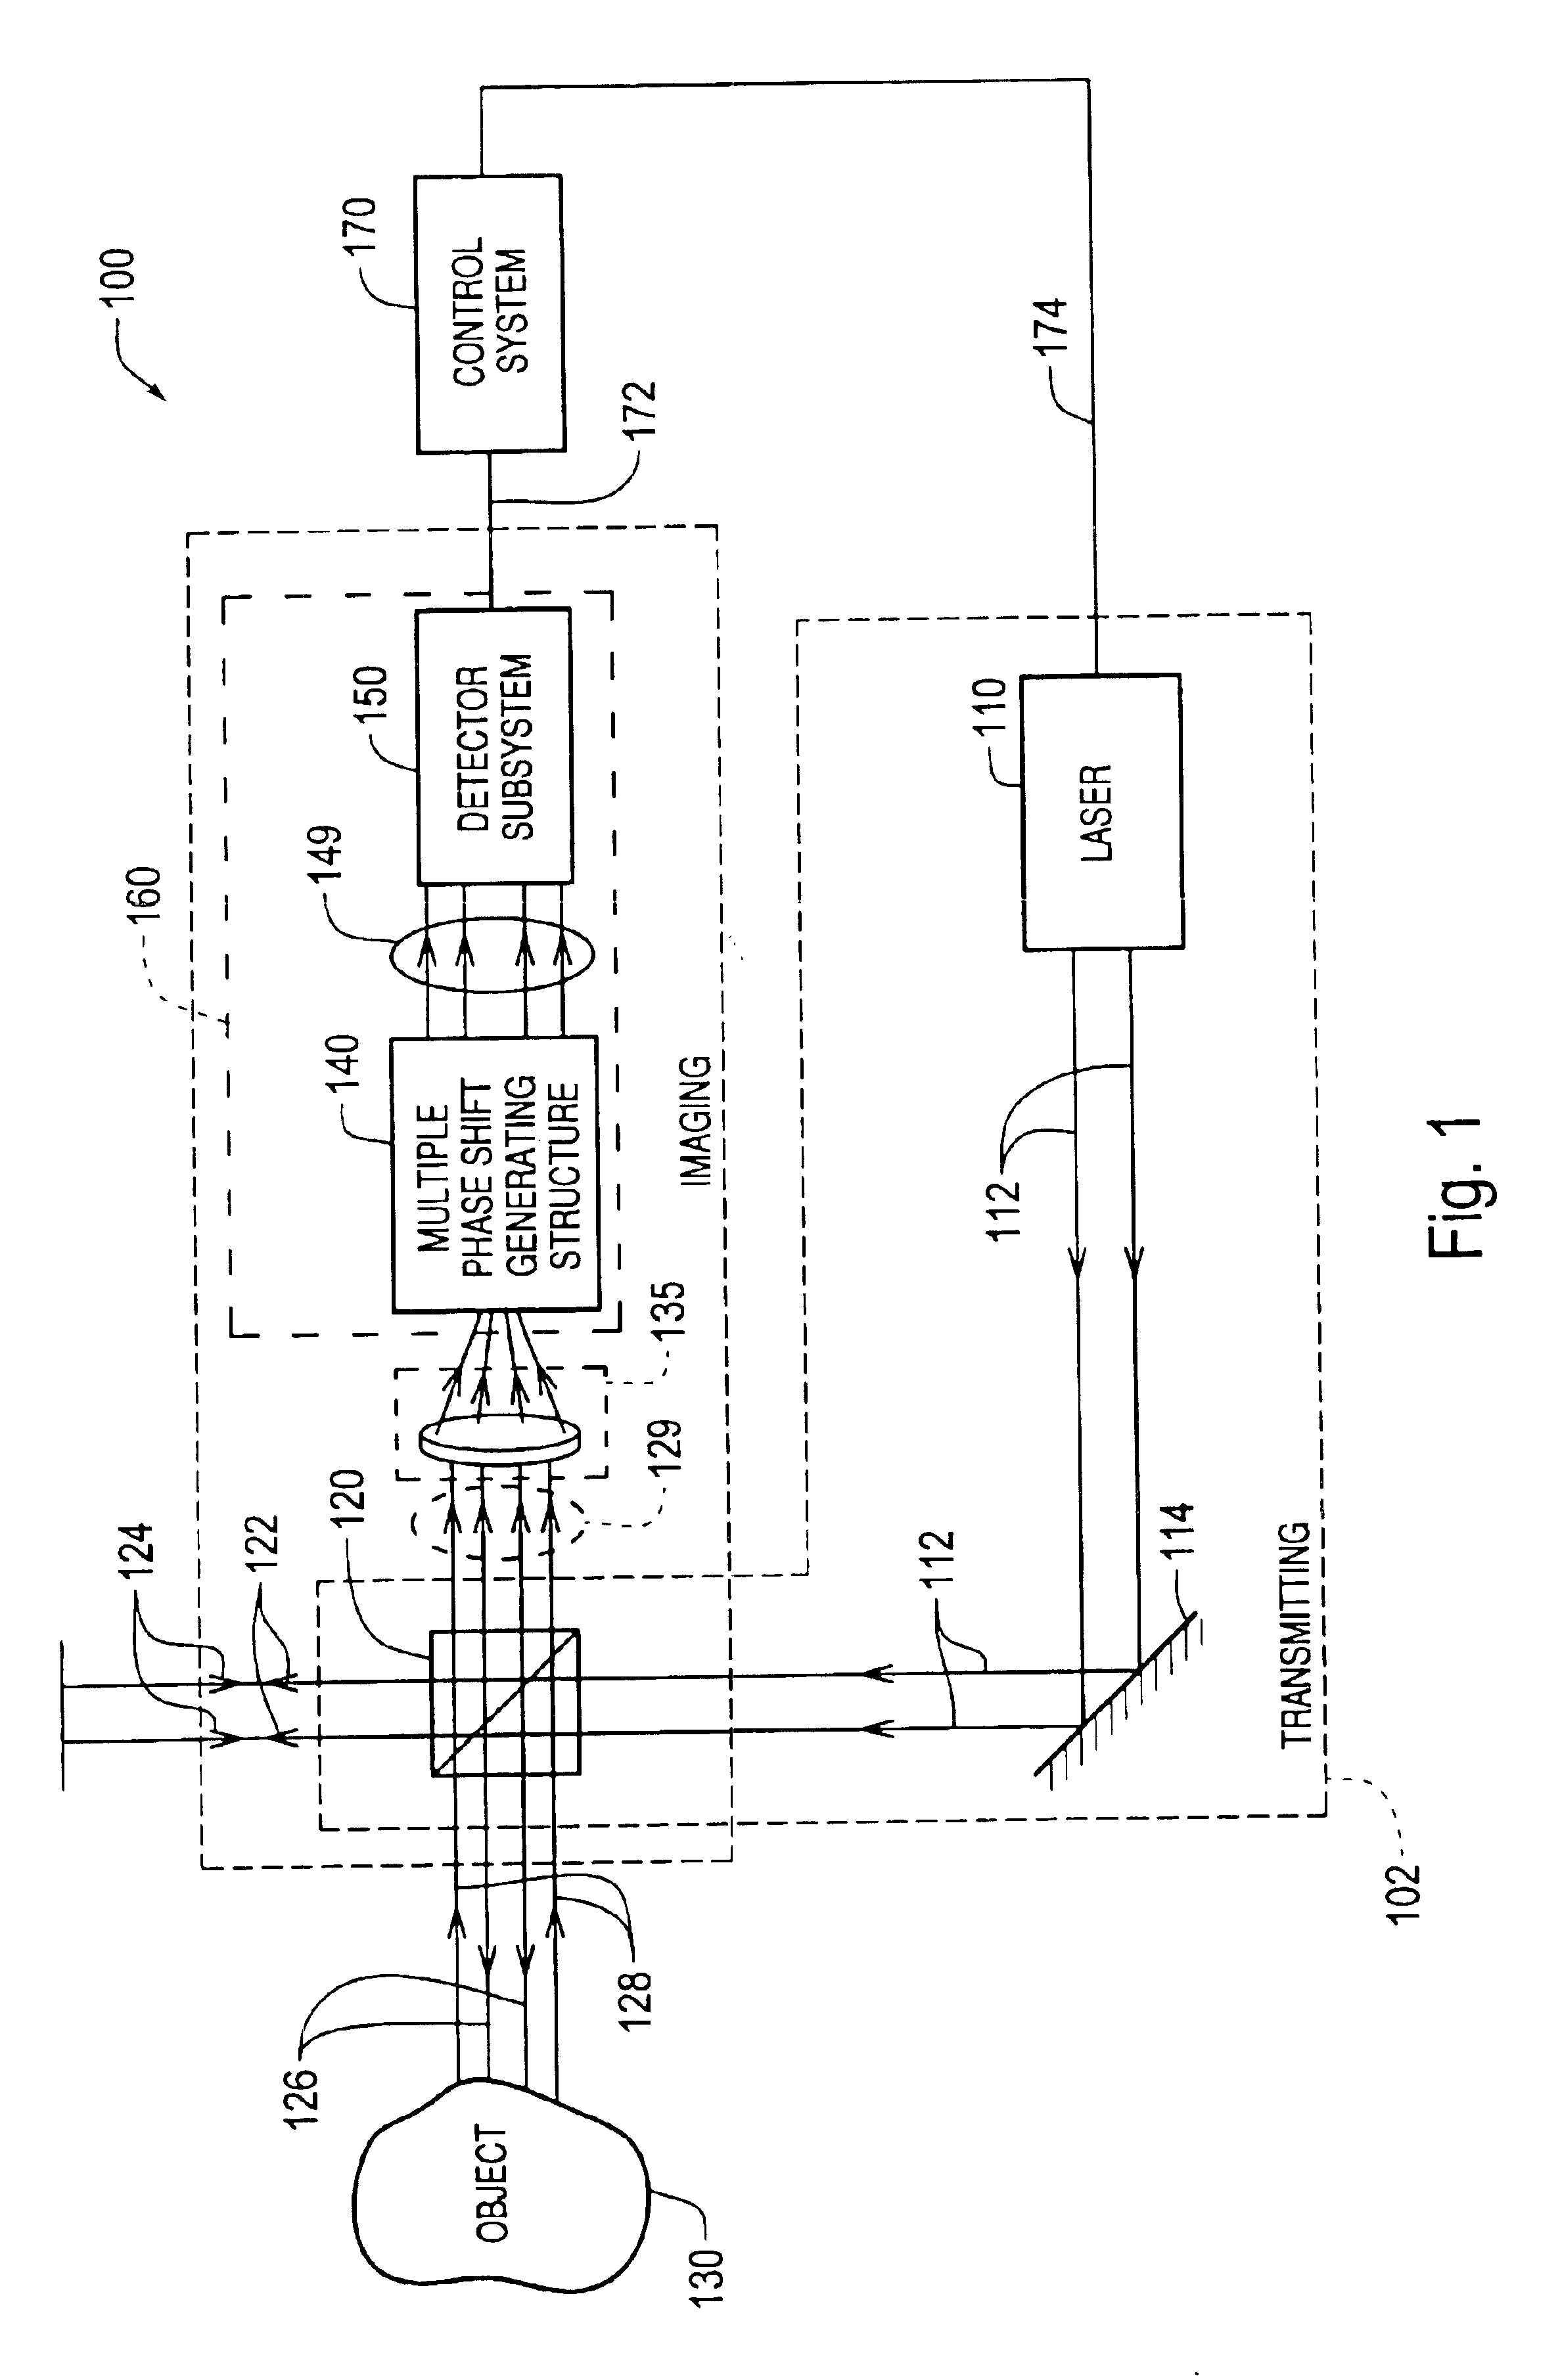 Interferometer using integrated imaging array and high-density phase-shifting array